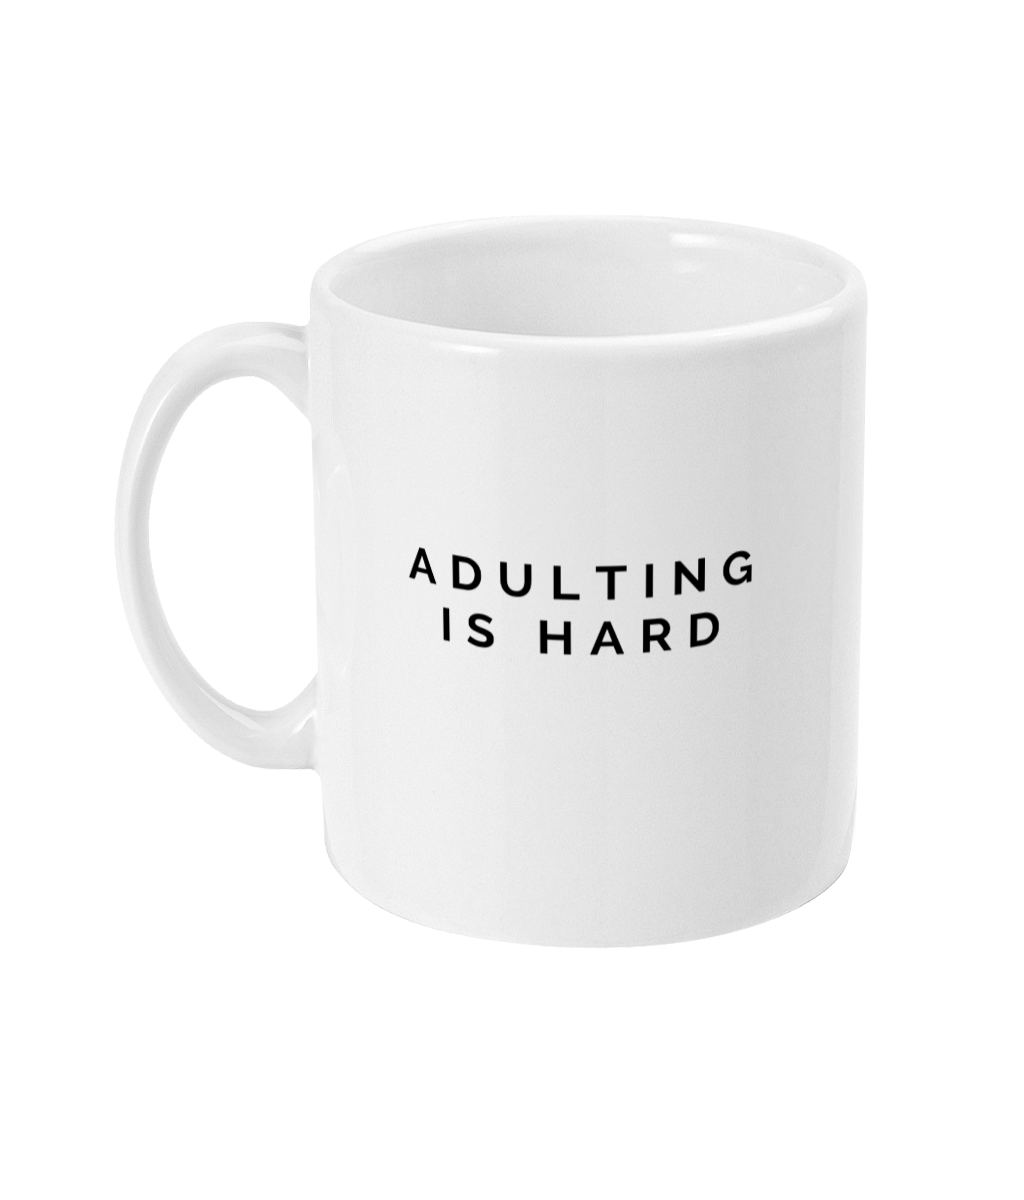 Mug that reads: adulting is hard